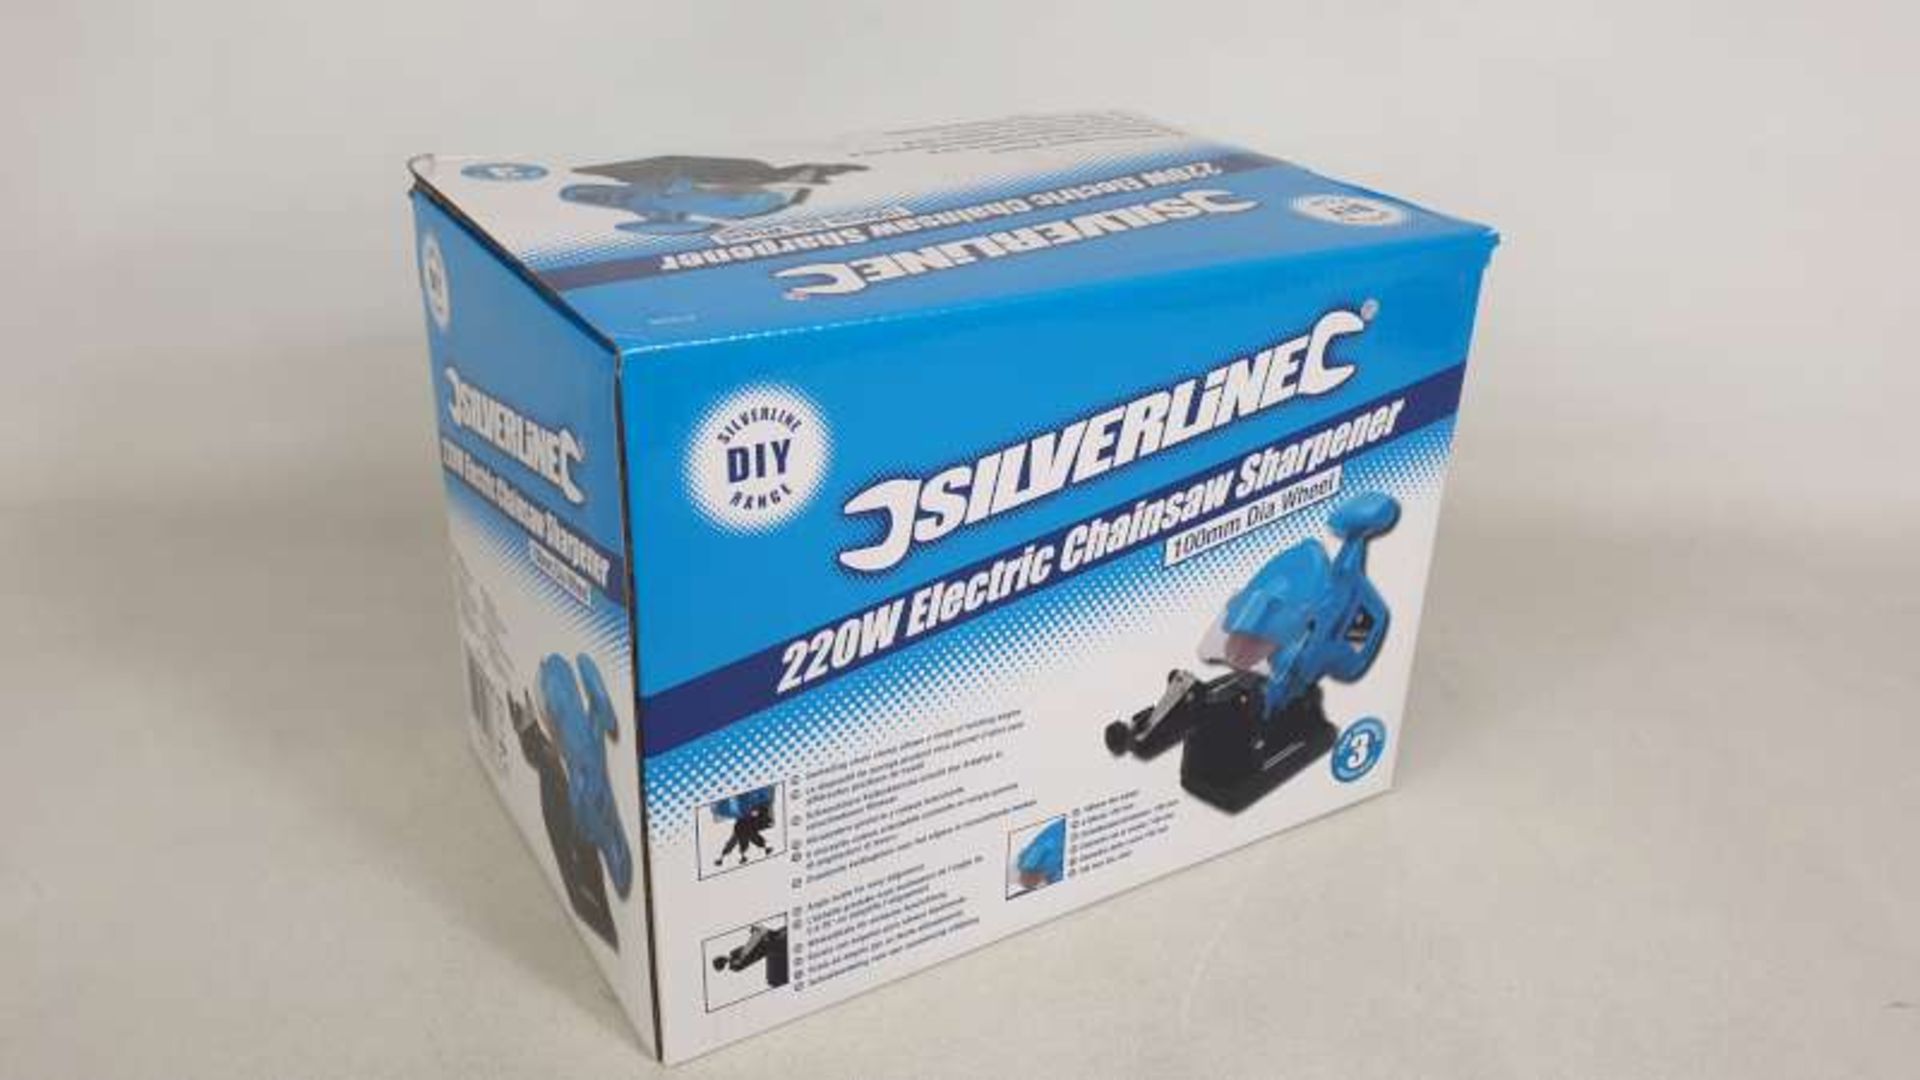 6 X BRAND NEW BOXED SILVERLINE 220W ELECTRIC CHAINSAW SHARPENERS WITH 100MM DIAL WHEEL AND 3 YEARS